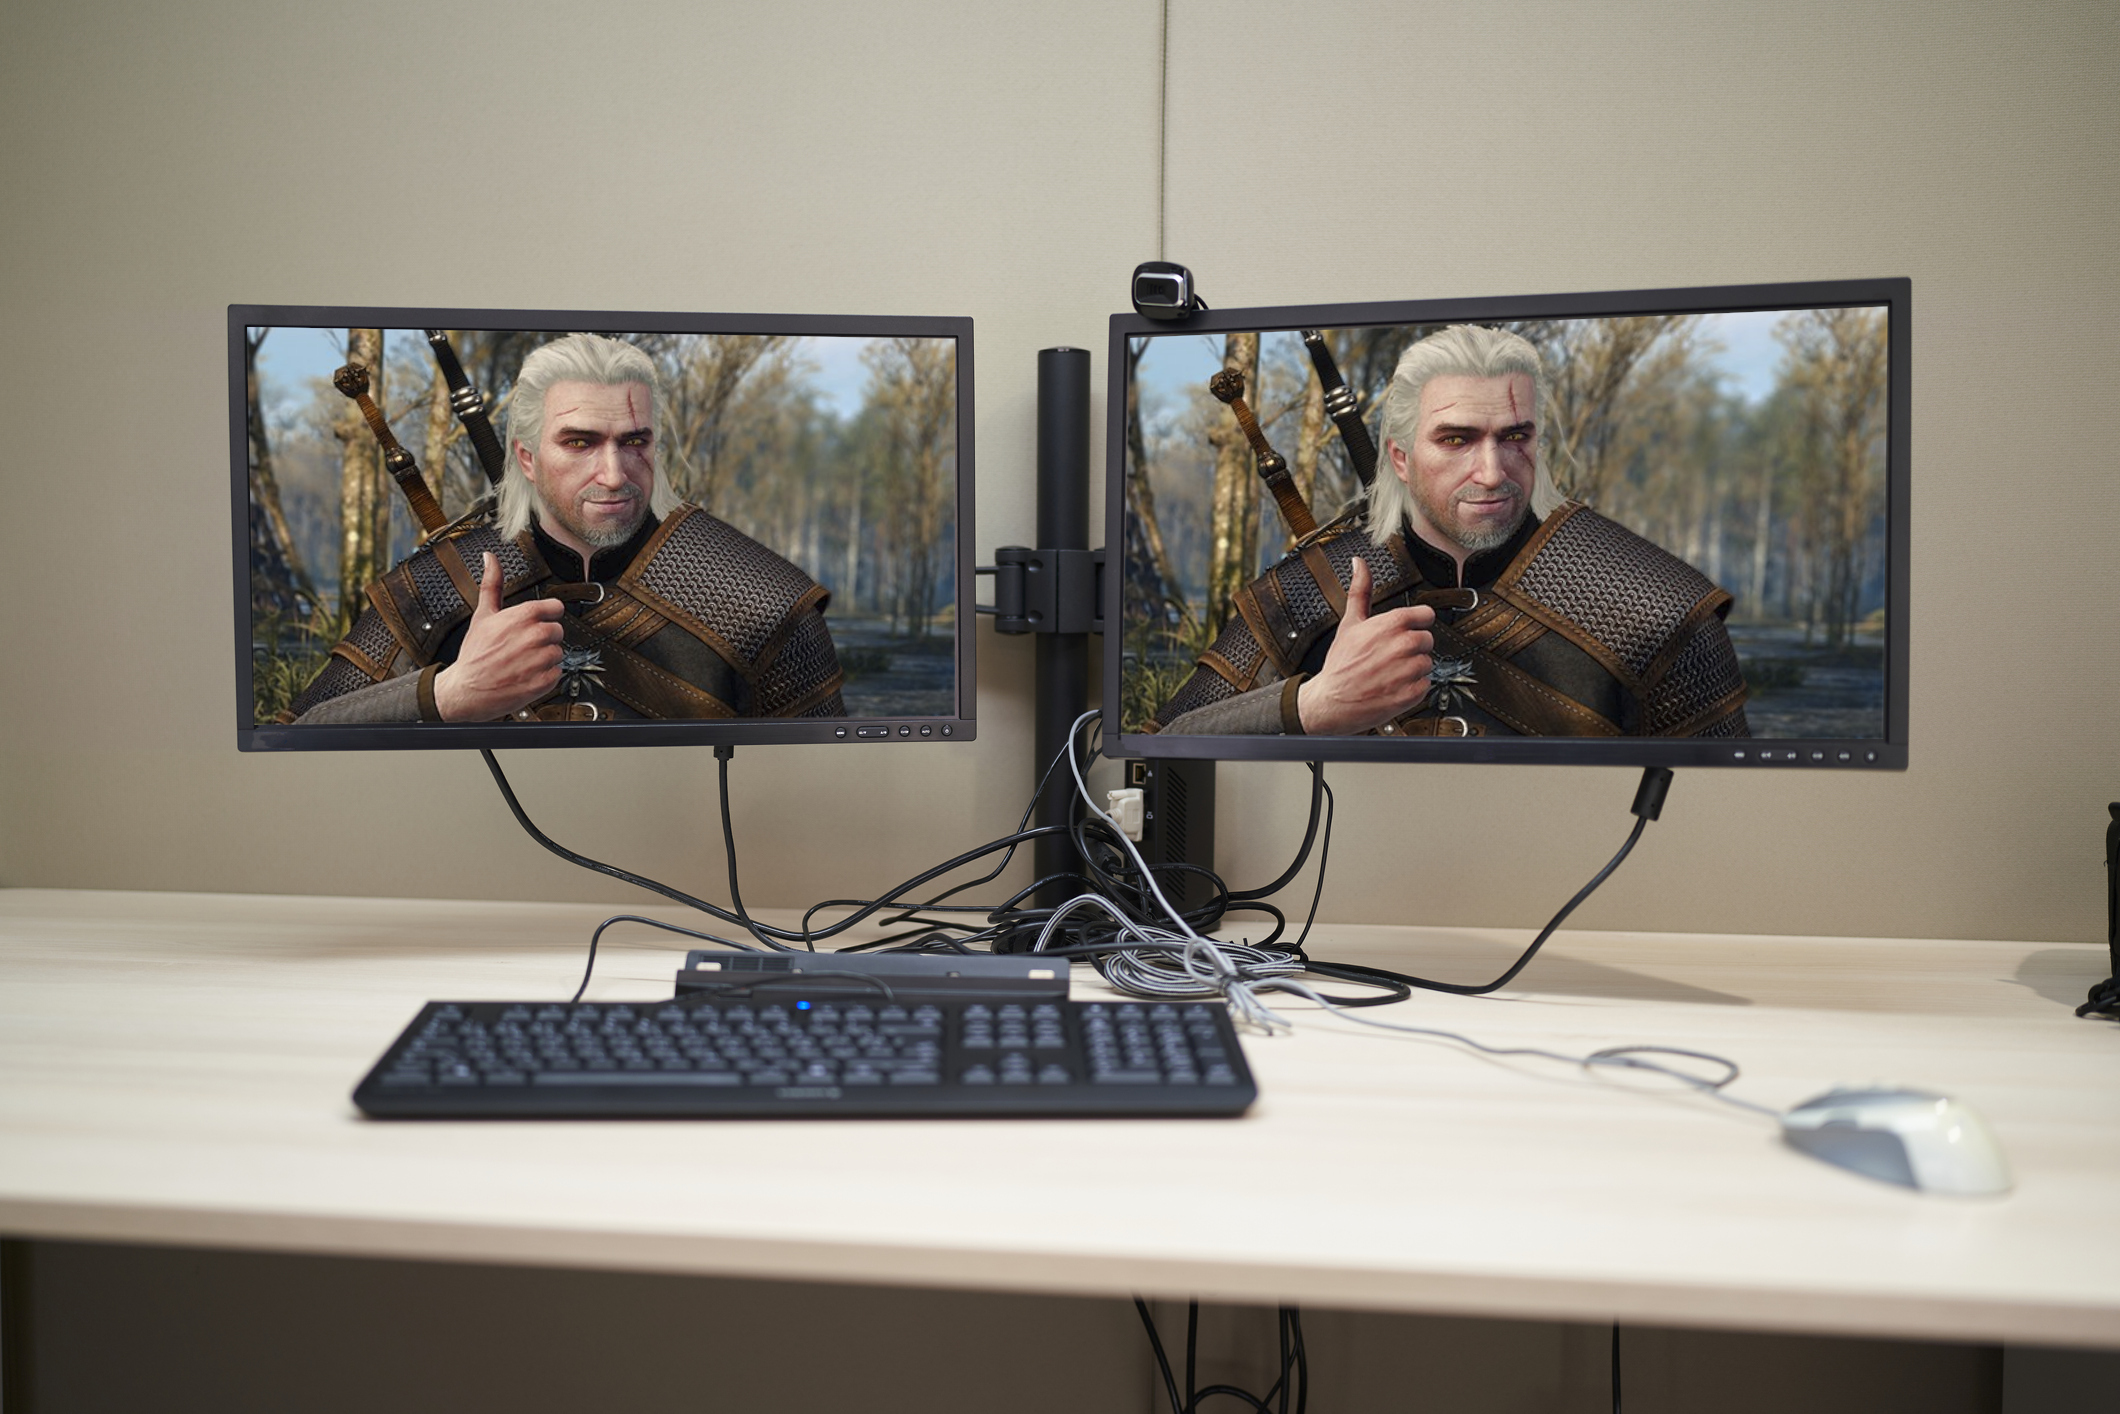 Modern workspace computer with two monitor black screen in desk home interior - stock photo, photoshopped so both monitors display geralt of rivia holding a thumbs up